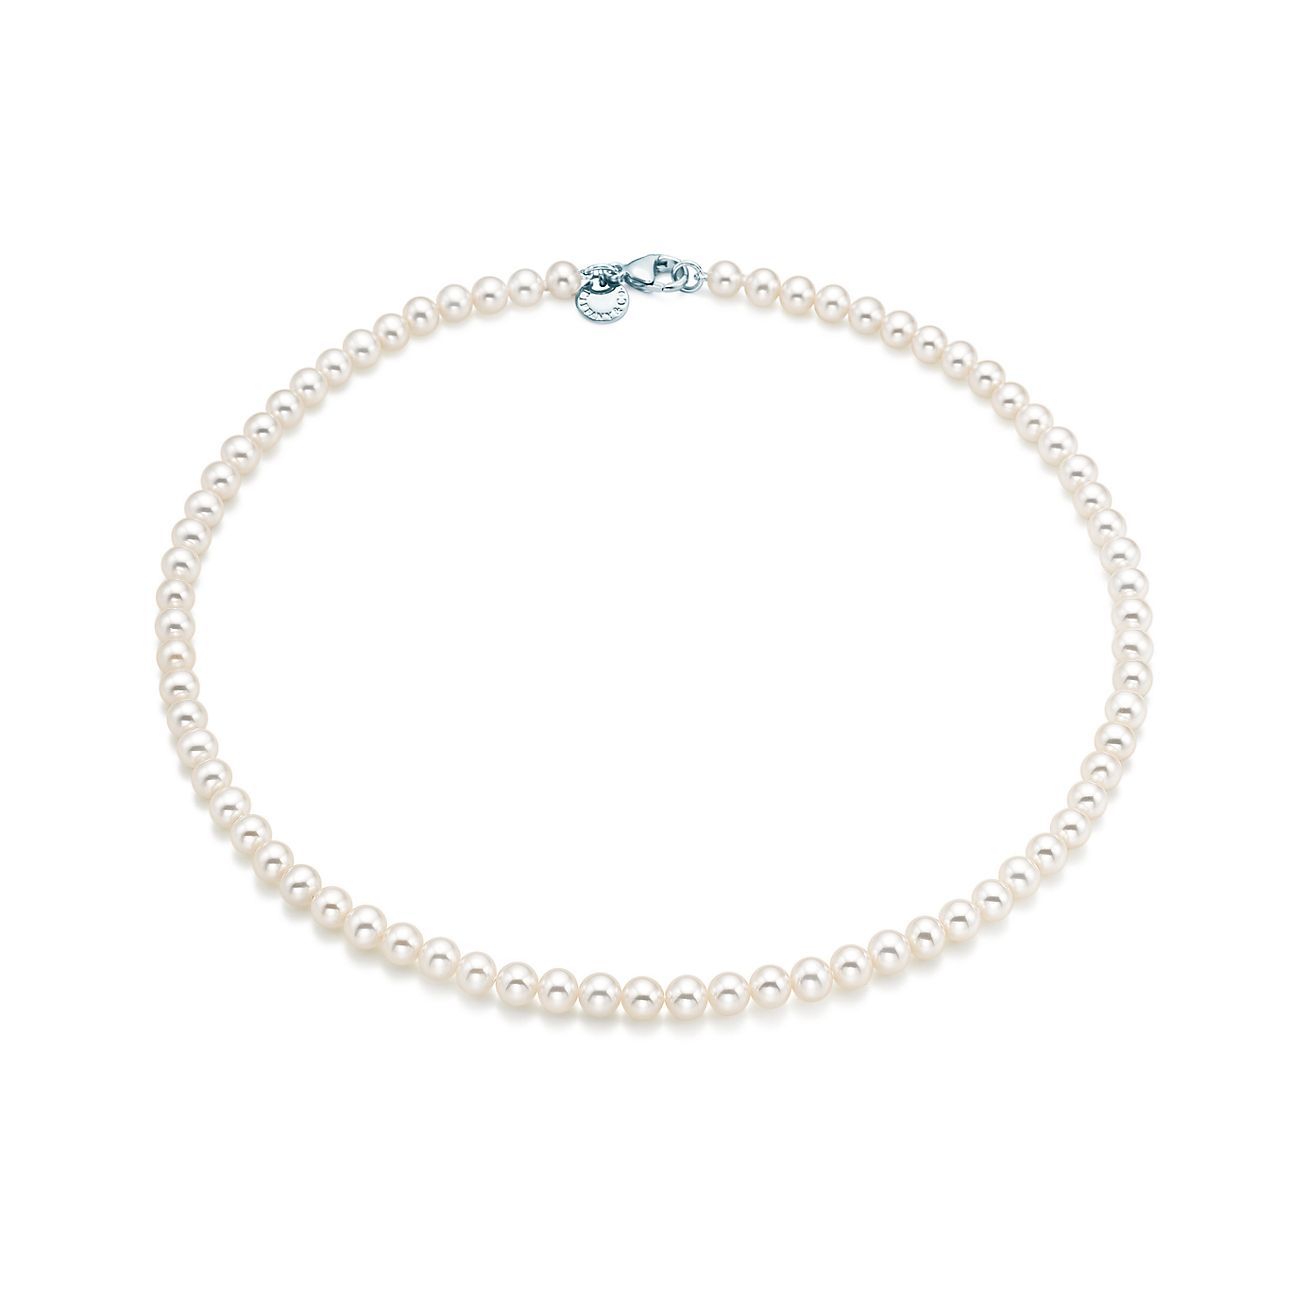 Ziegfeld Collection Pearl Necklace with a Silver Clasp, 5-6 mm | Tiffany & Co. | Tiffany & Co. (UK)